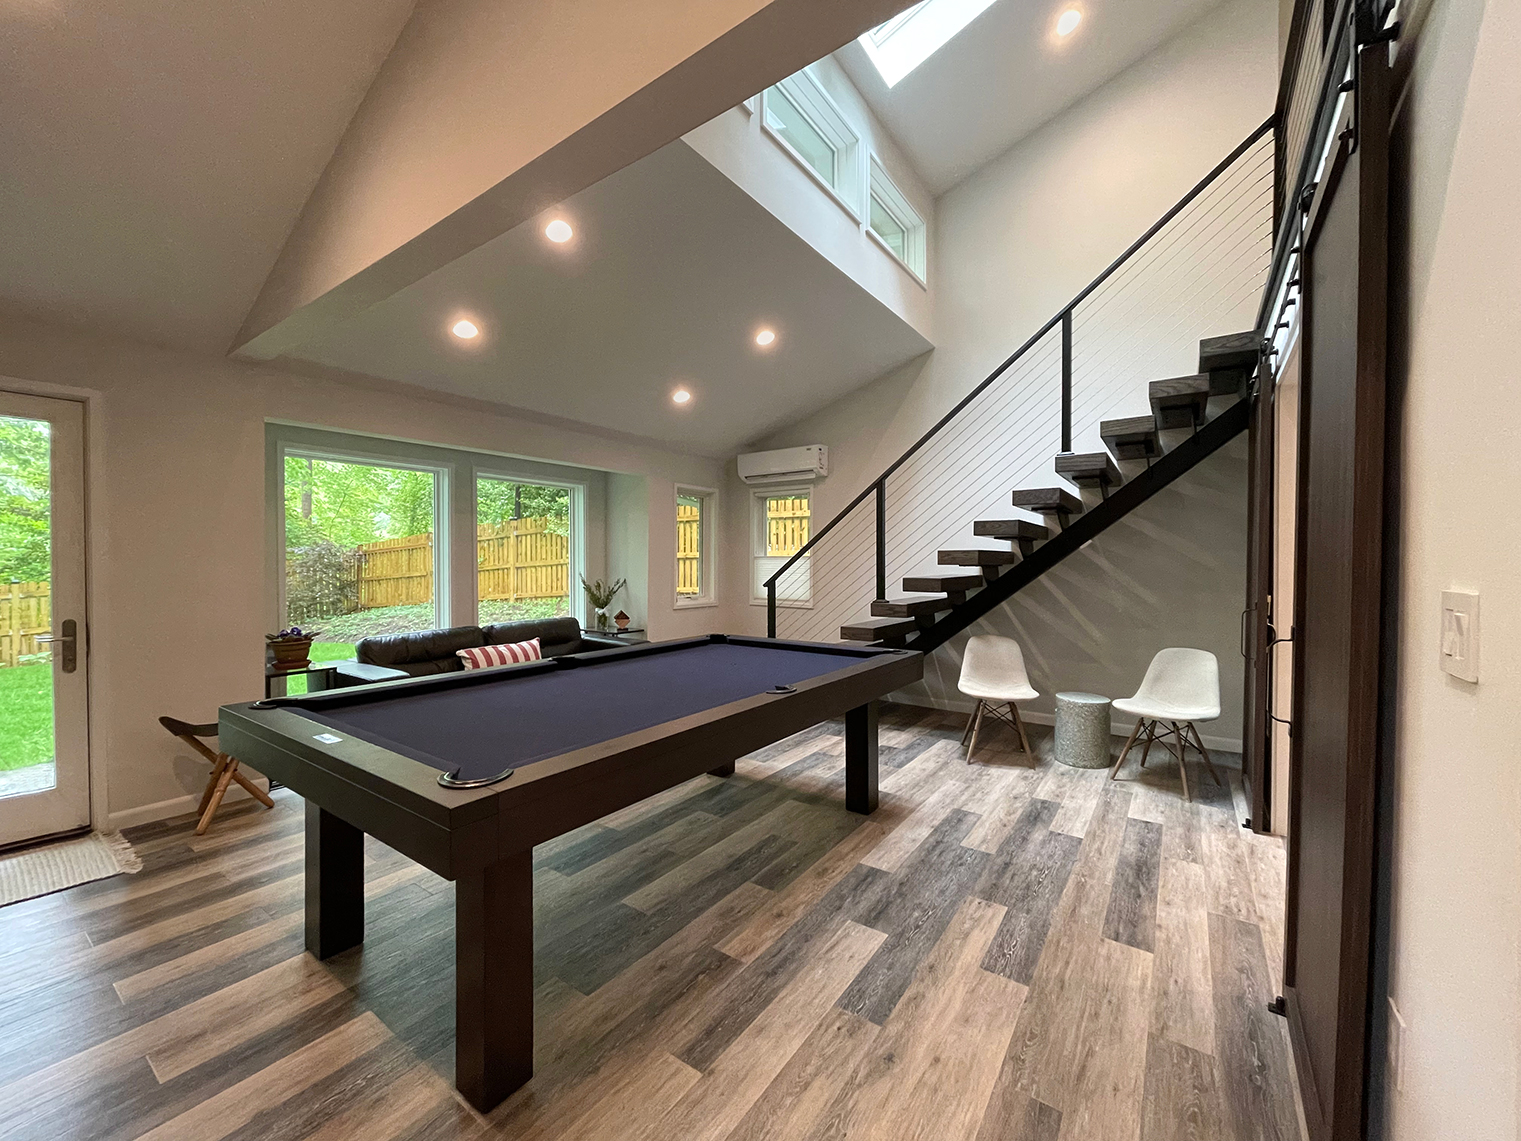 Game room with billiards table and floating stairs to loft level.